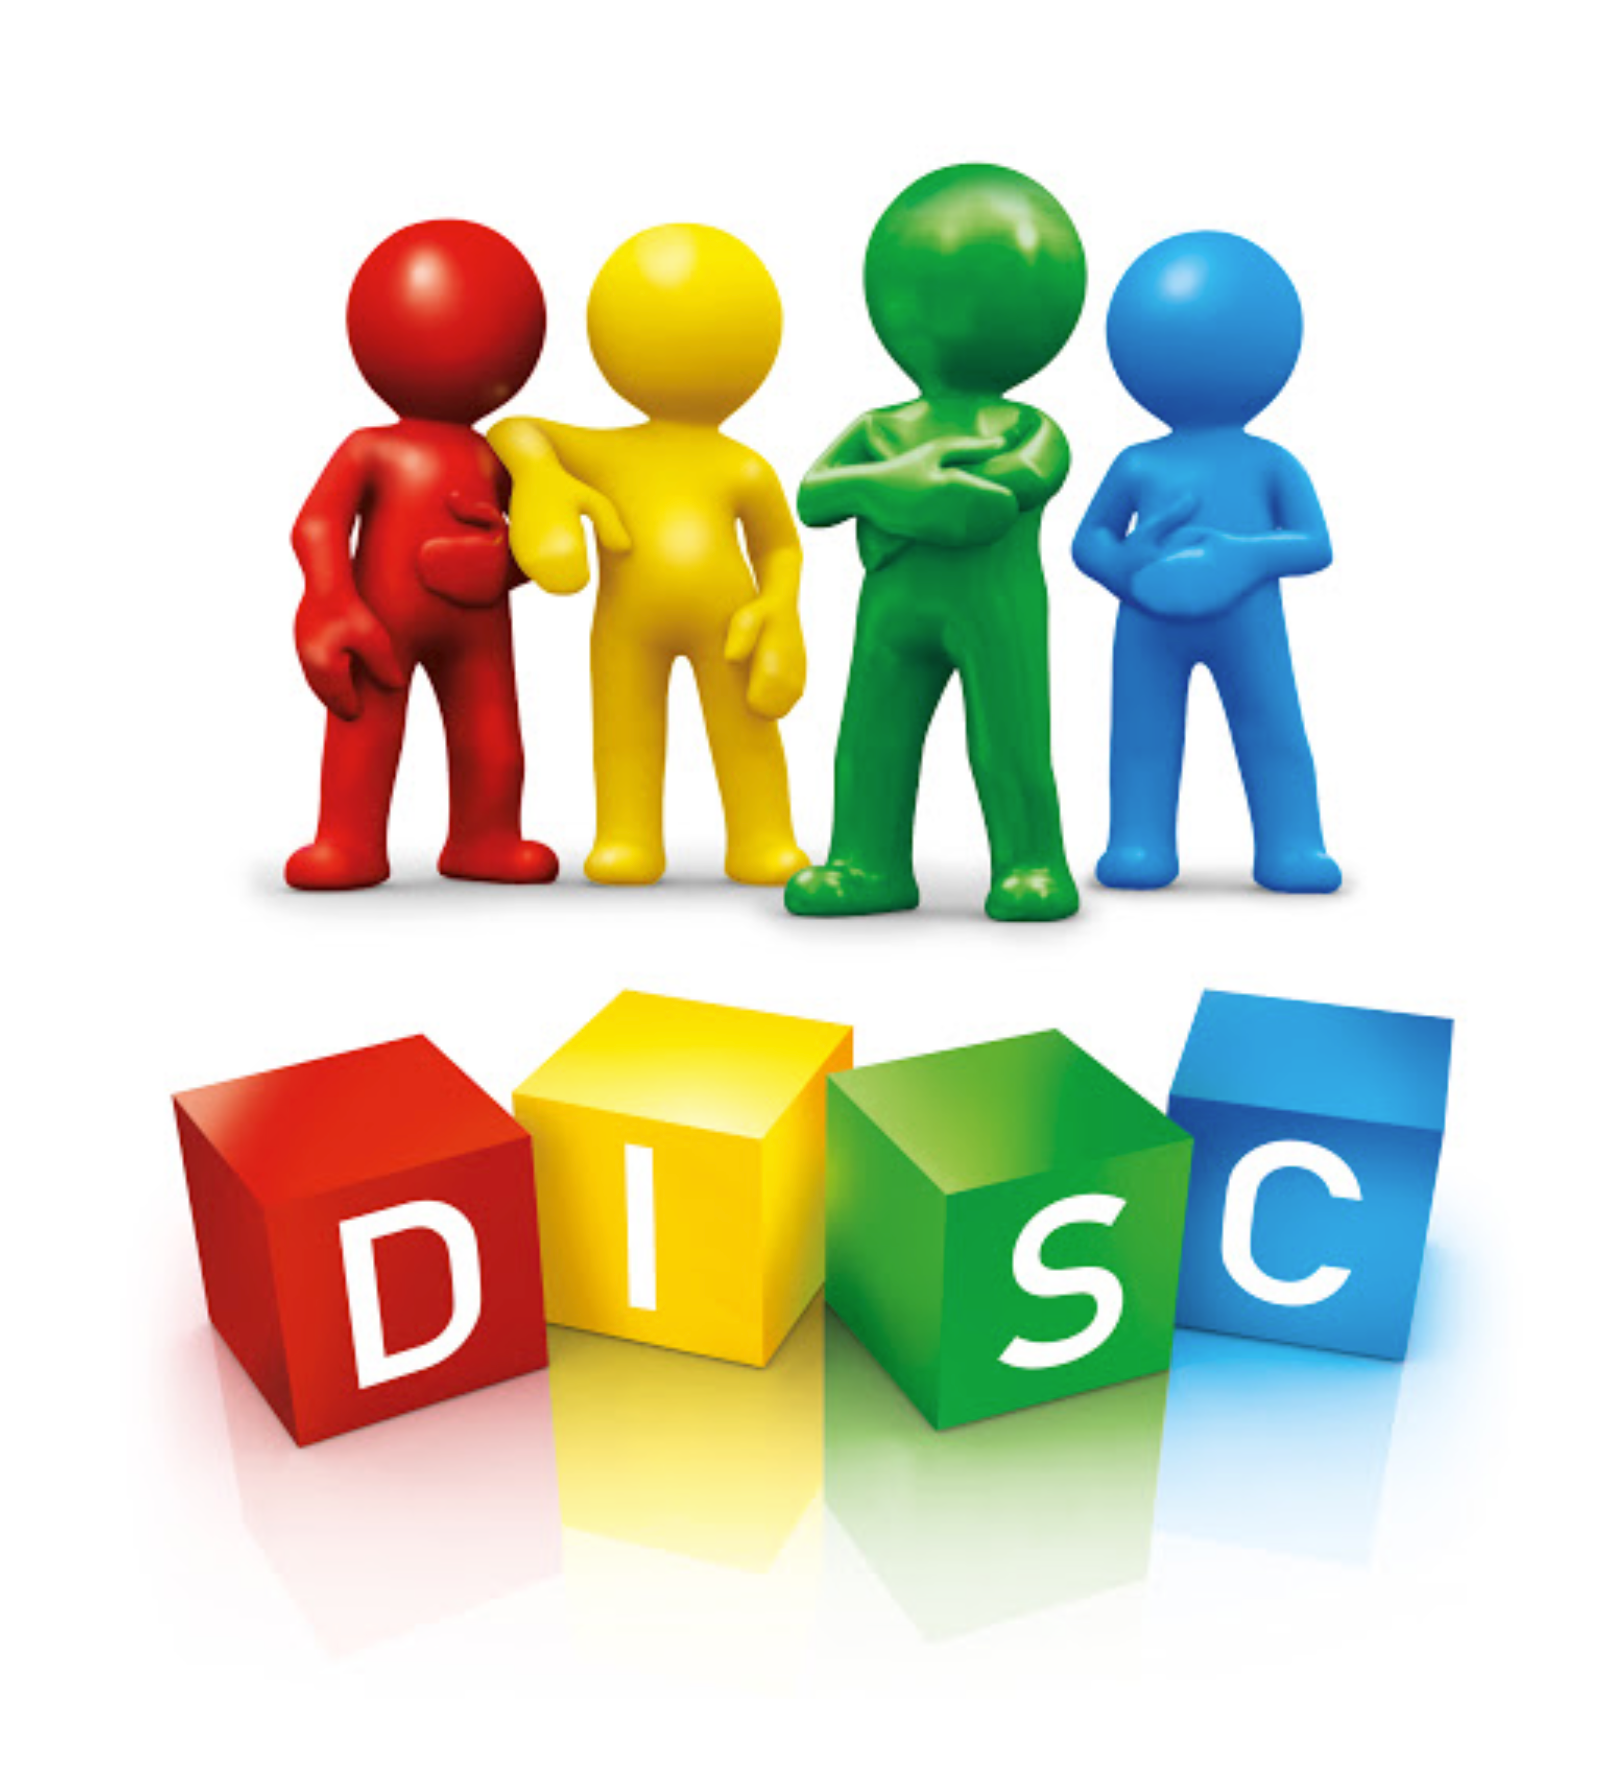 Getting to know each other, orienting, choosing (disc)